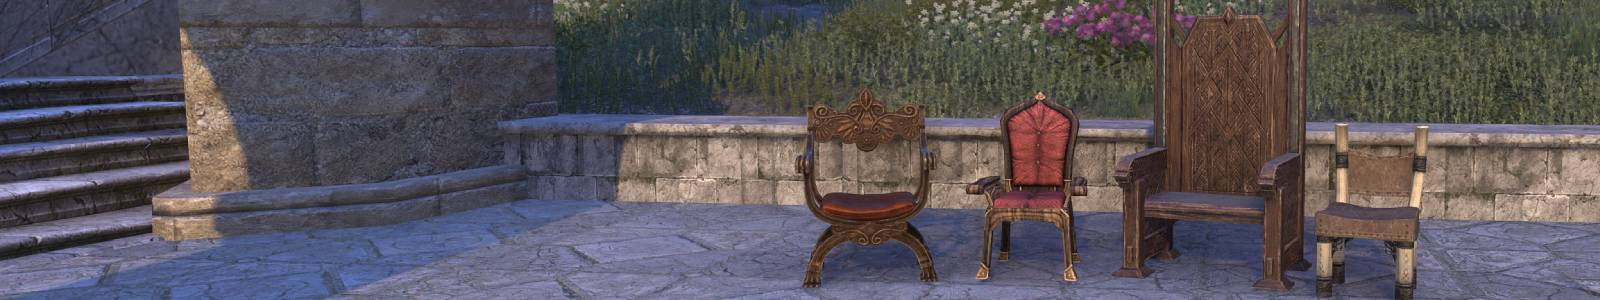 Argonian Seat of Authority - ESO header